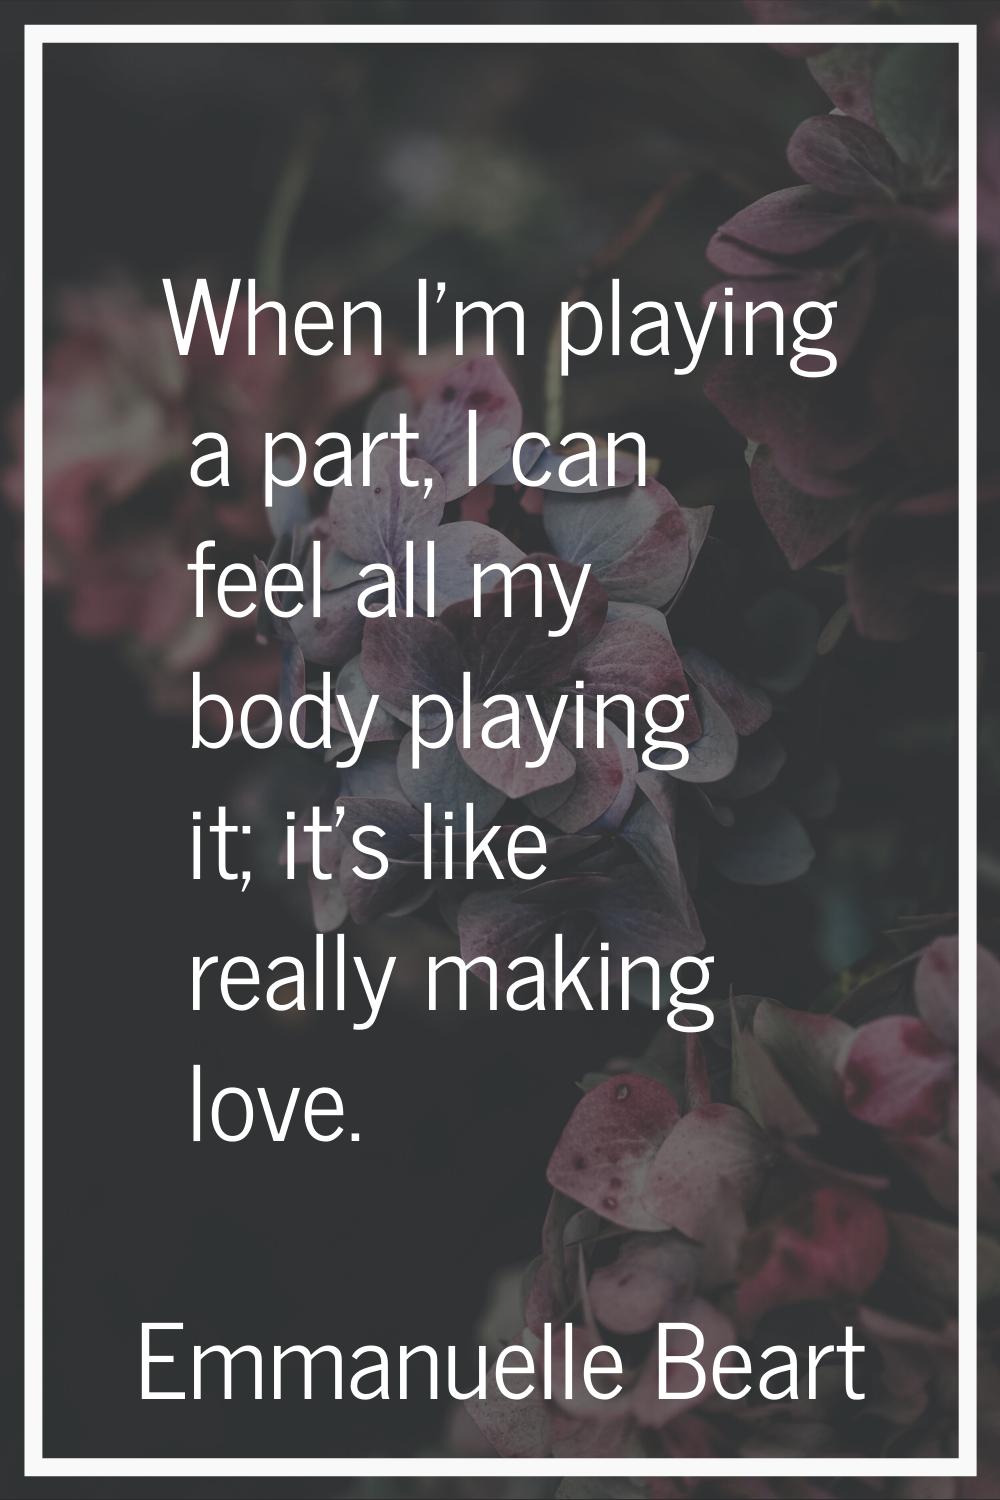 When I'm playing a part, I can feel all my body playing it; it's like really making love.